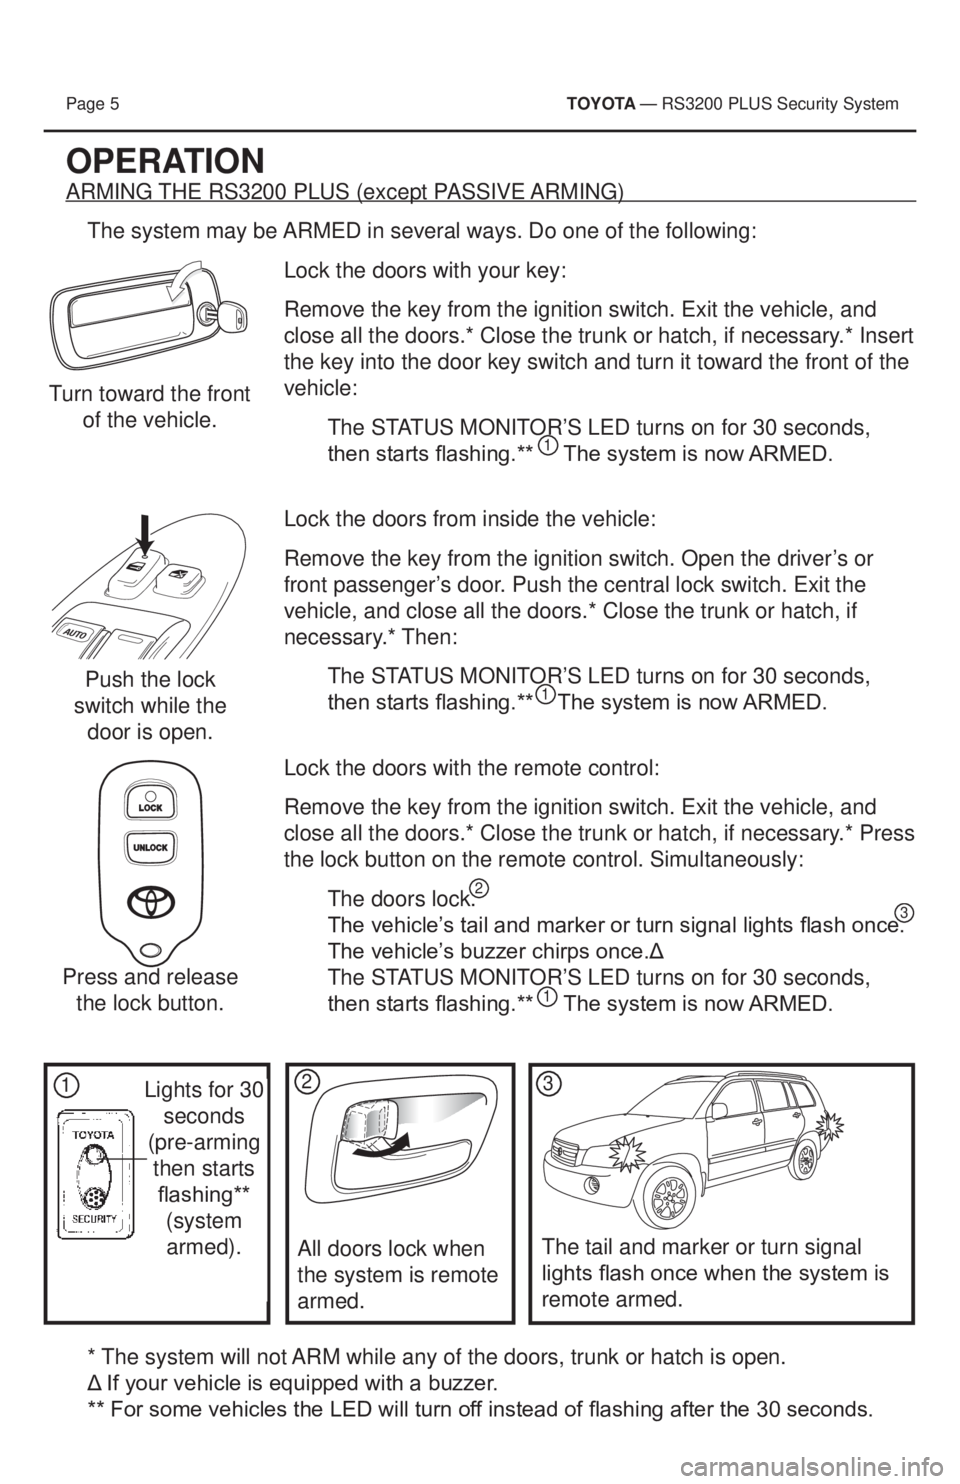 TOYOTA PRIUS V 2013  Accessories, Audio & Navigation (in English) Page 5         T OYOTA — RS3200 PLUS Security System 
OPERATION
ARMING THE RS3200 PLUS (except PASSIVE ARMING)
The system may be ARMED in several ways. Do one of the following: Lock the doors with y